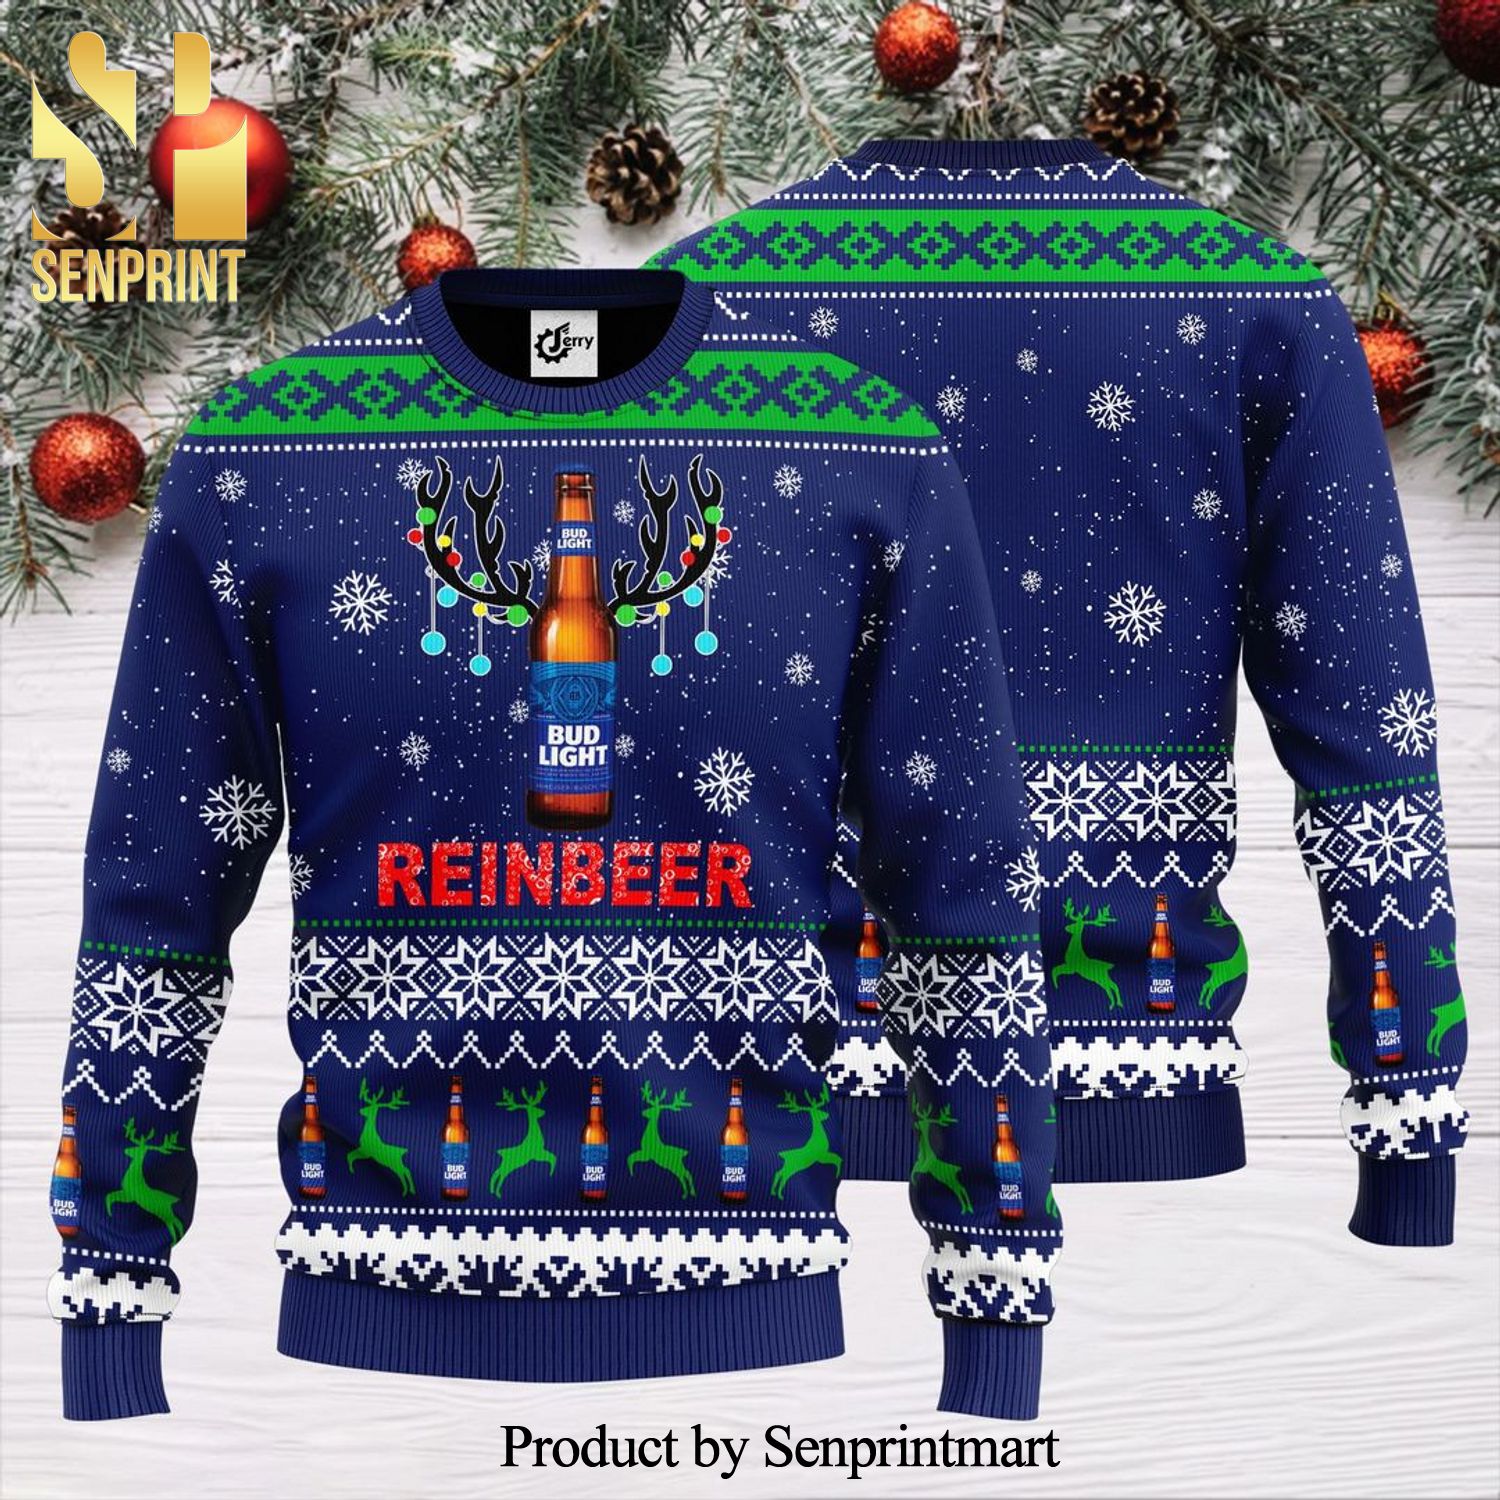 Bud Light Reinbeer Knitted Ugly Christmas Sweater